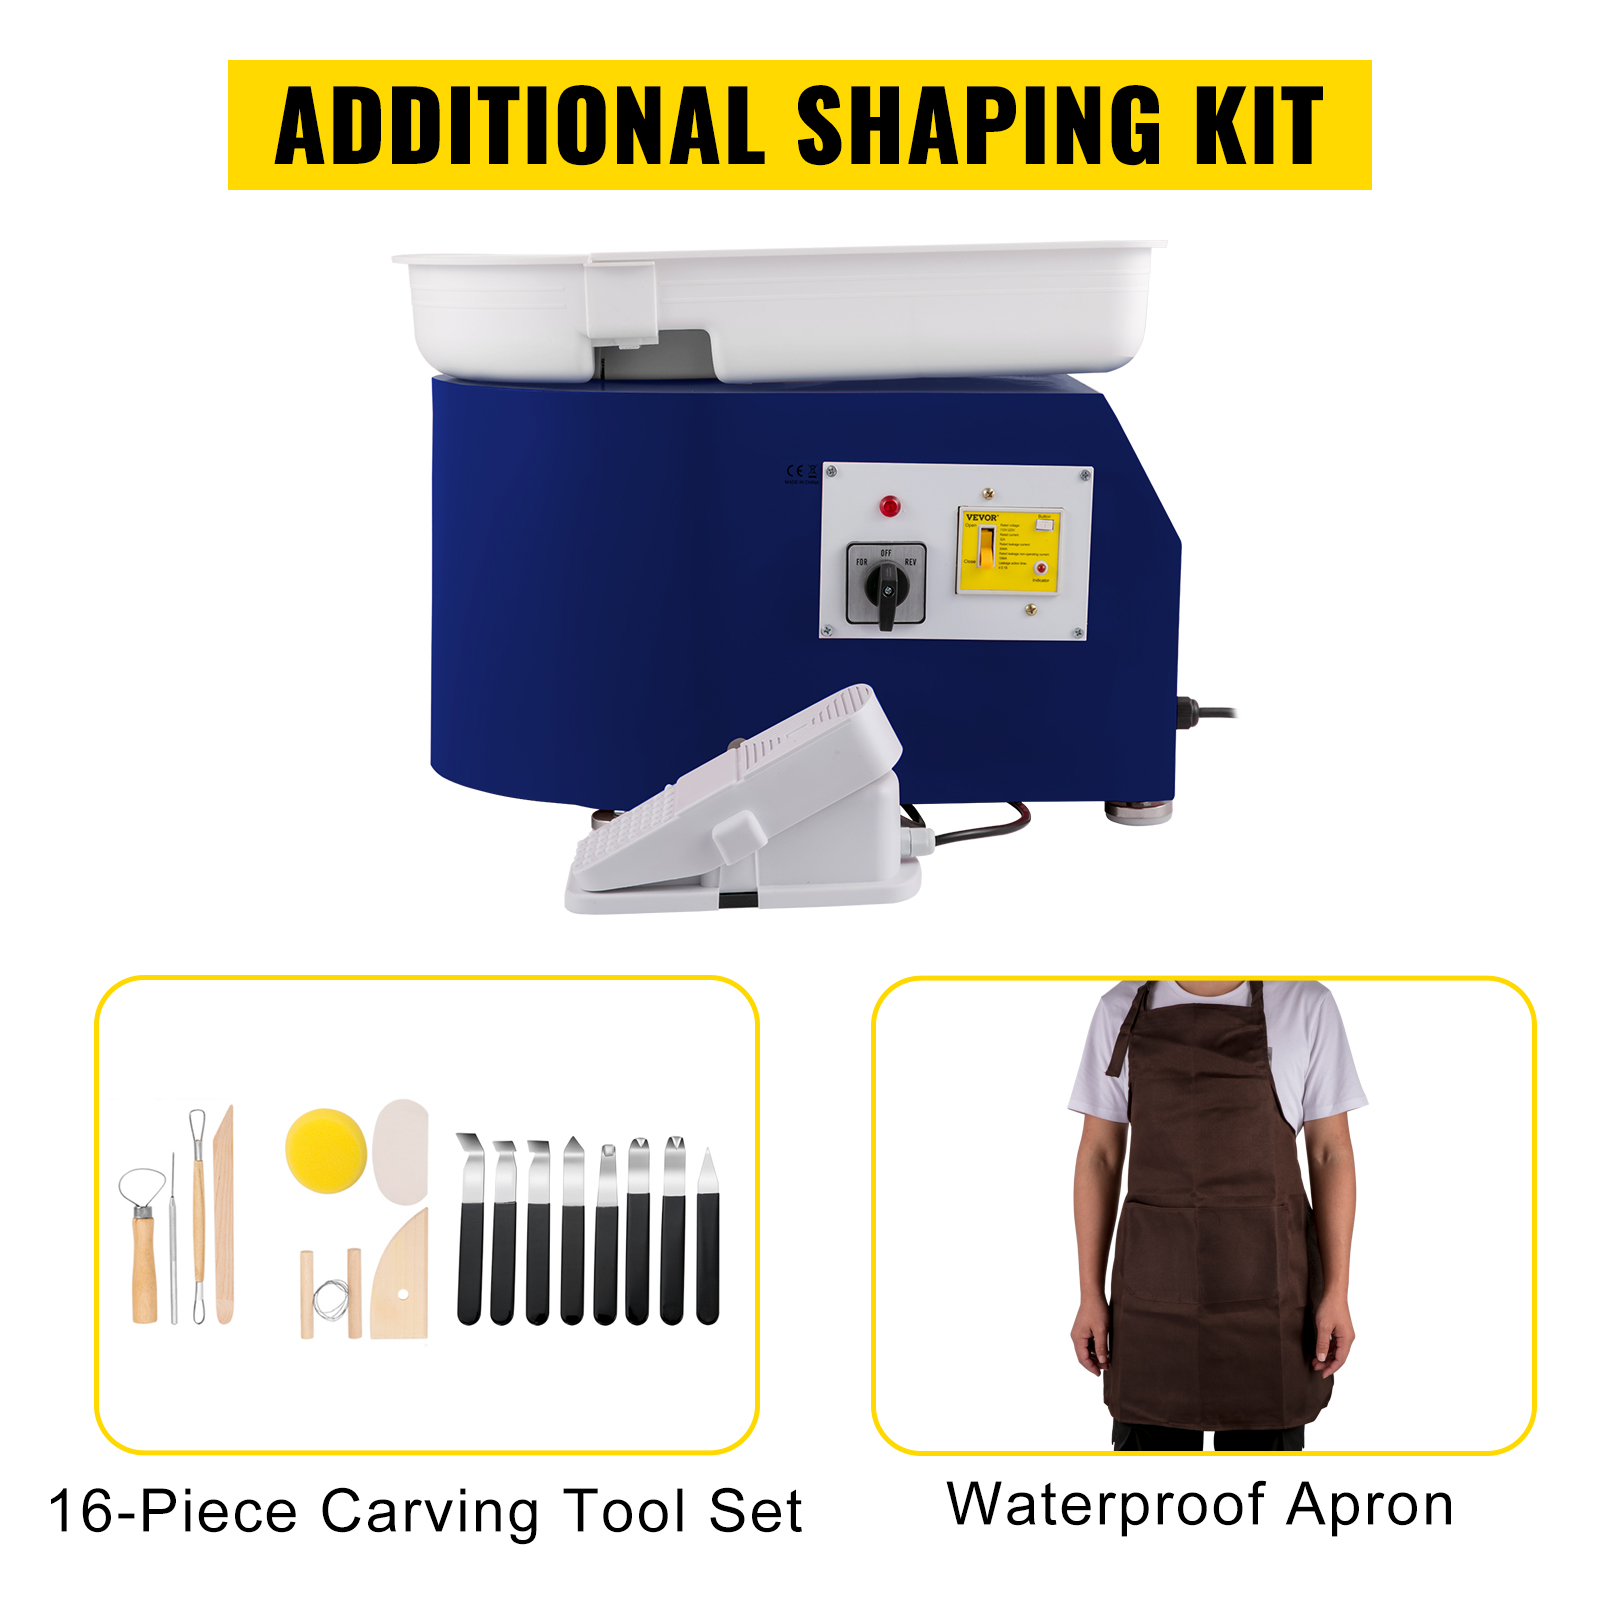  VEVOR Pottery Wheel, Pottery Forming Machine 9.8 LCD Touch  Screen, 350W Ceramic Pottery Electric DIY Clay Sculpting Tools, Foot Pedal  & Detachable ABS Basin for Adults and Beginners Art Craft